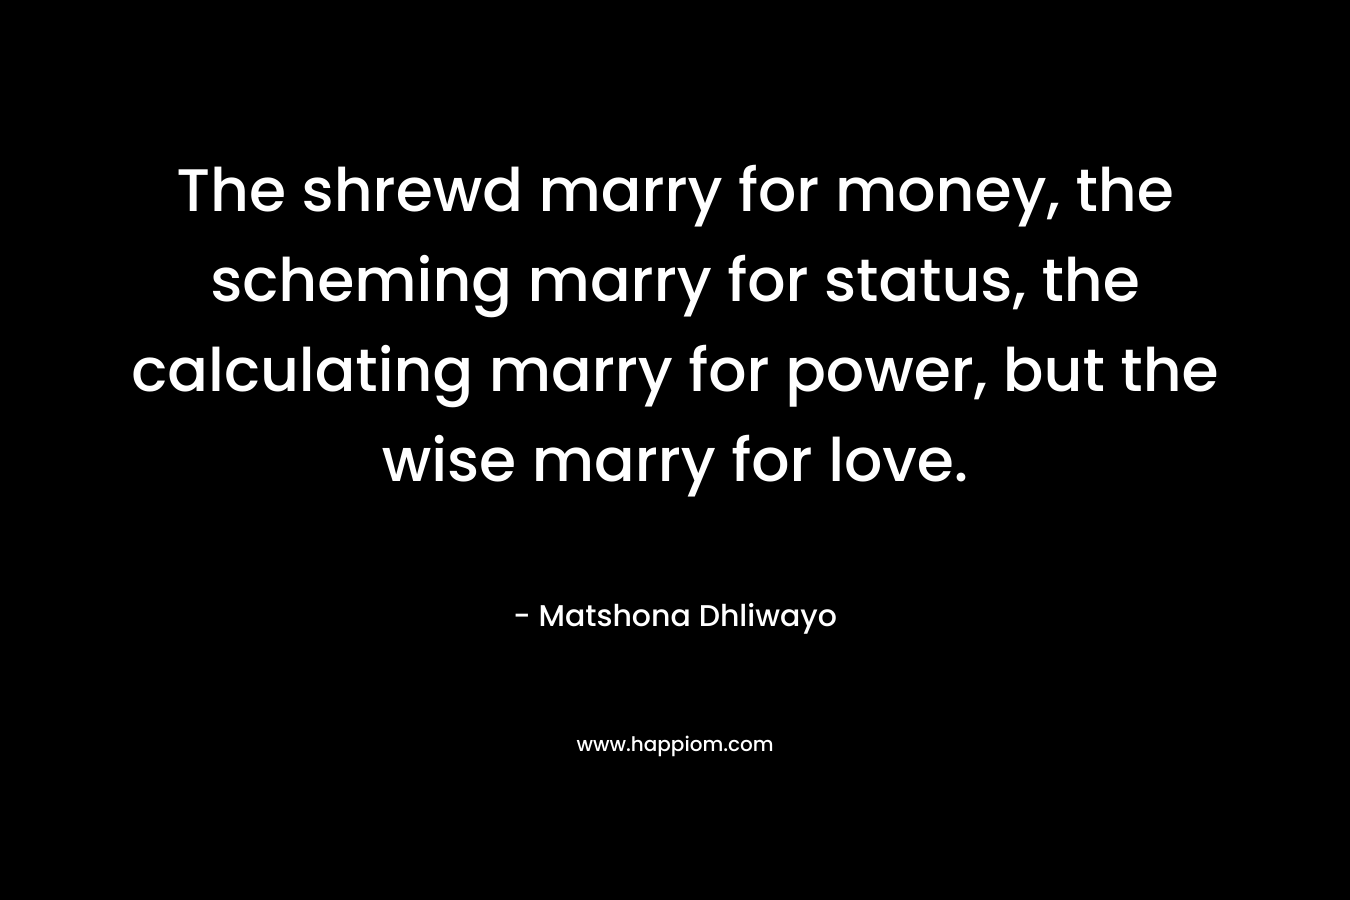 The shrewd marry for money, the scheming marry for status, the calculating marry for power, but the wise marry for love.